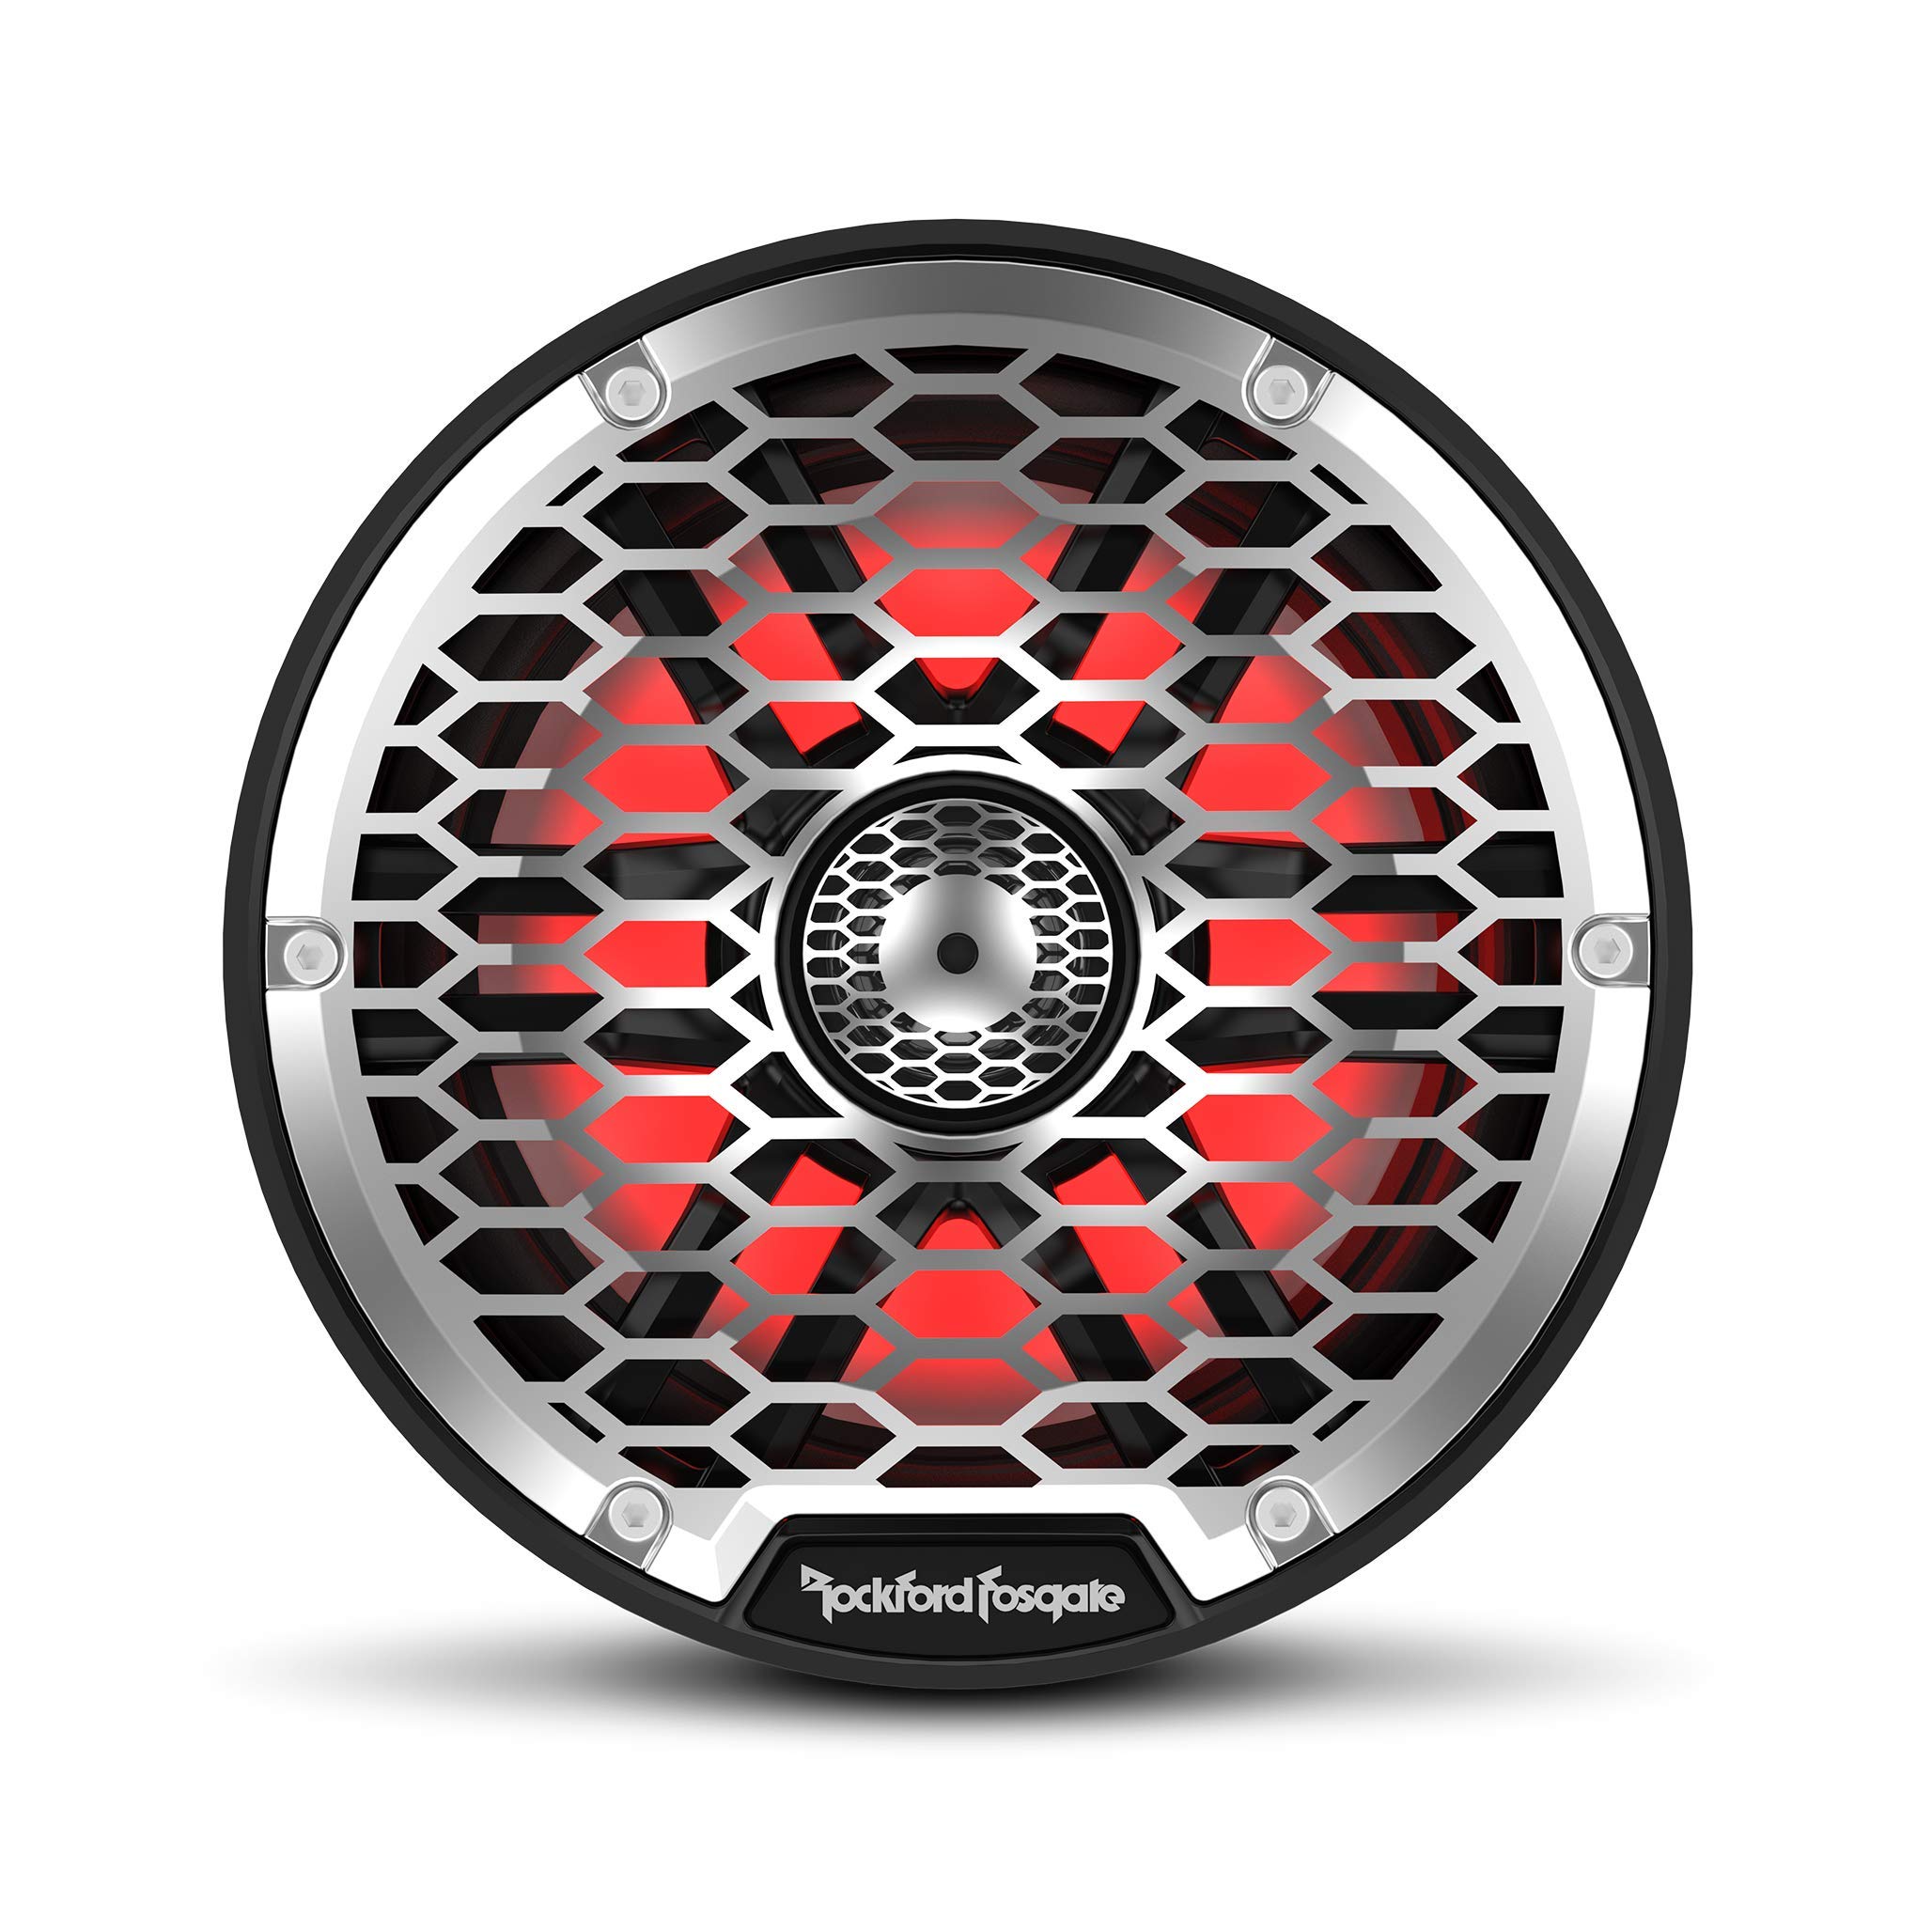 Rockford Fosgate M2-65B Color Optix 6.5” 2-Way Coaxial Multicolor LED Lighted Marine Speakers - Black/Stainless (Pair)